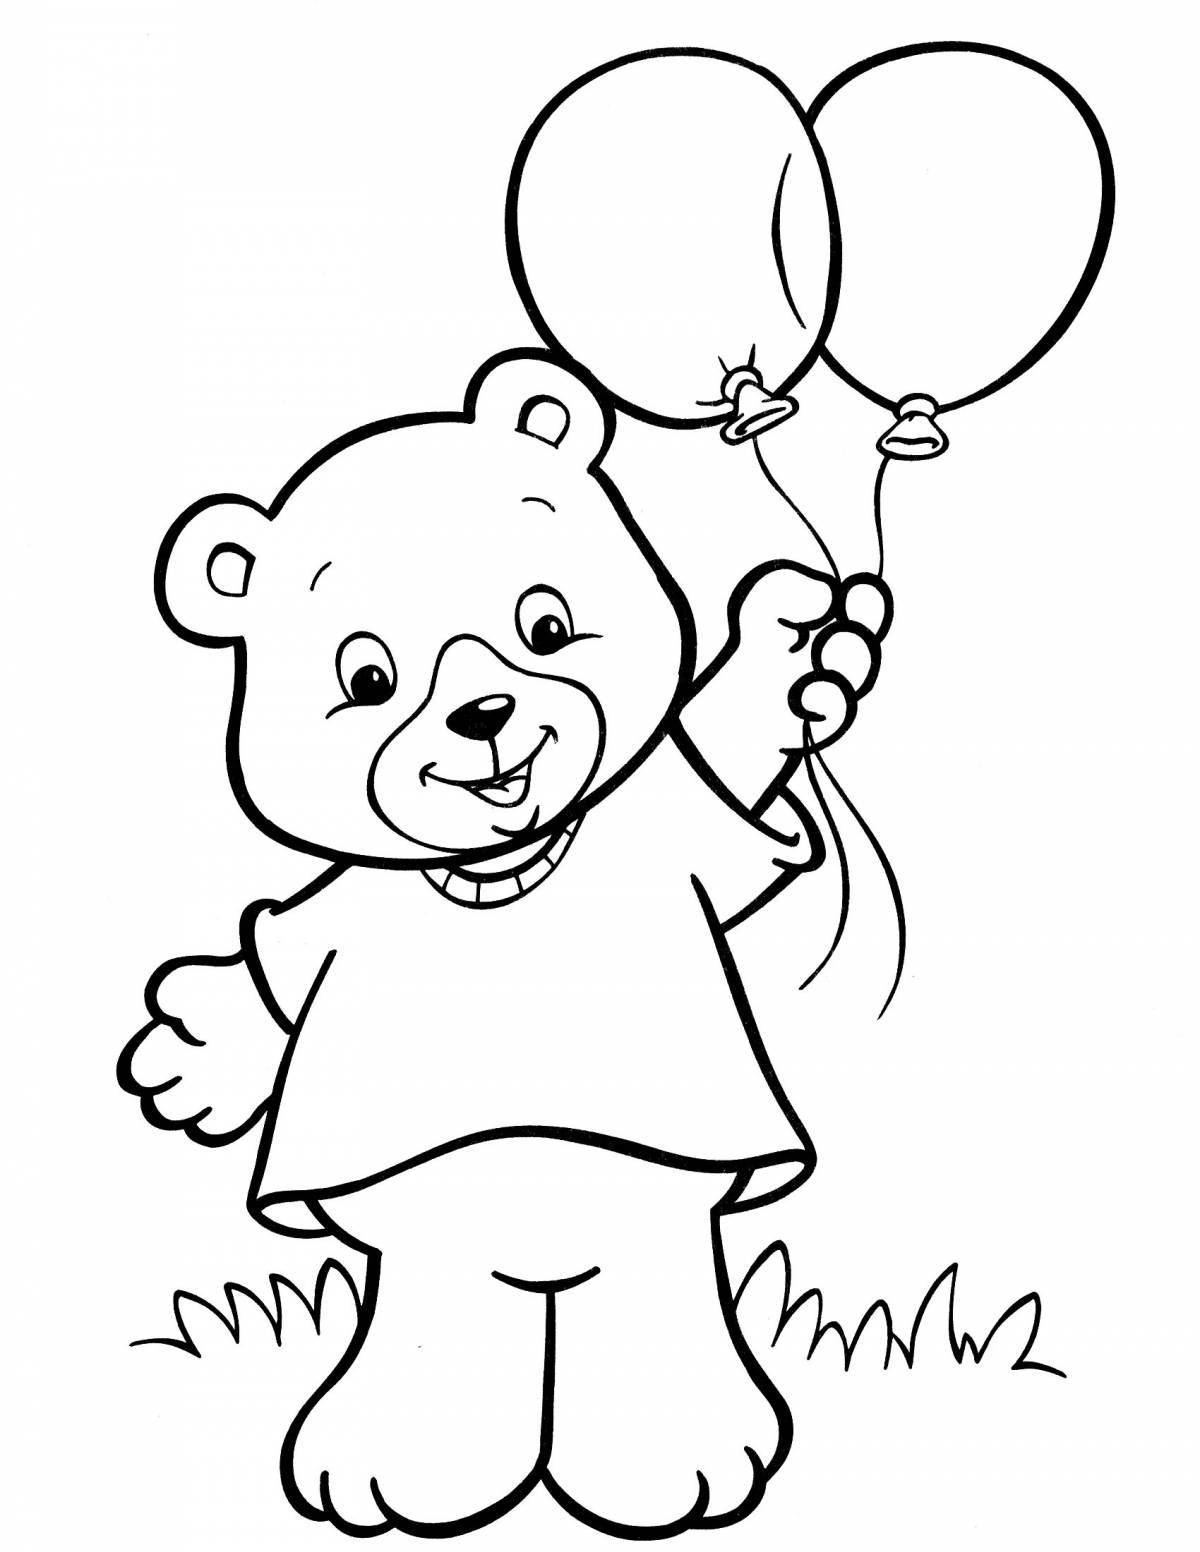 Amazing bear coloring book for 2-3 year olds